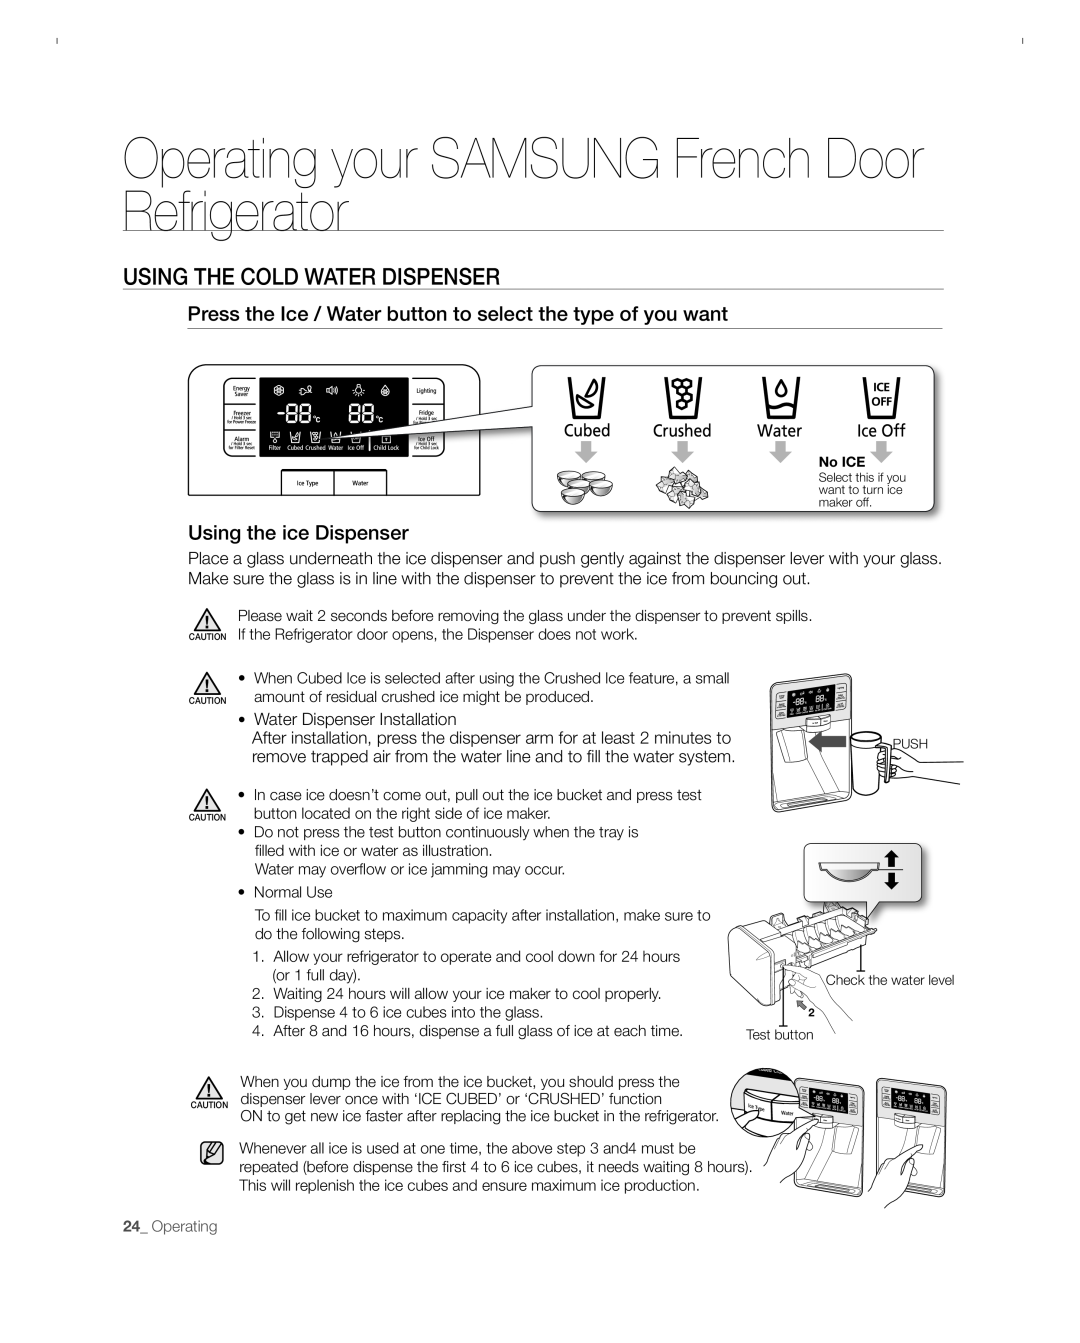 Samsung RFG297ACBP user manual Using The Cold Water Dispenser, Operating your SAMSUNG French Door Refrigerator 